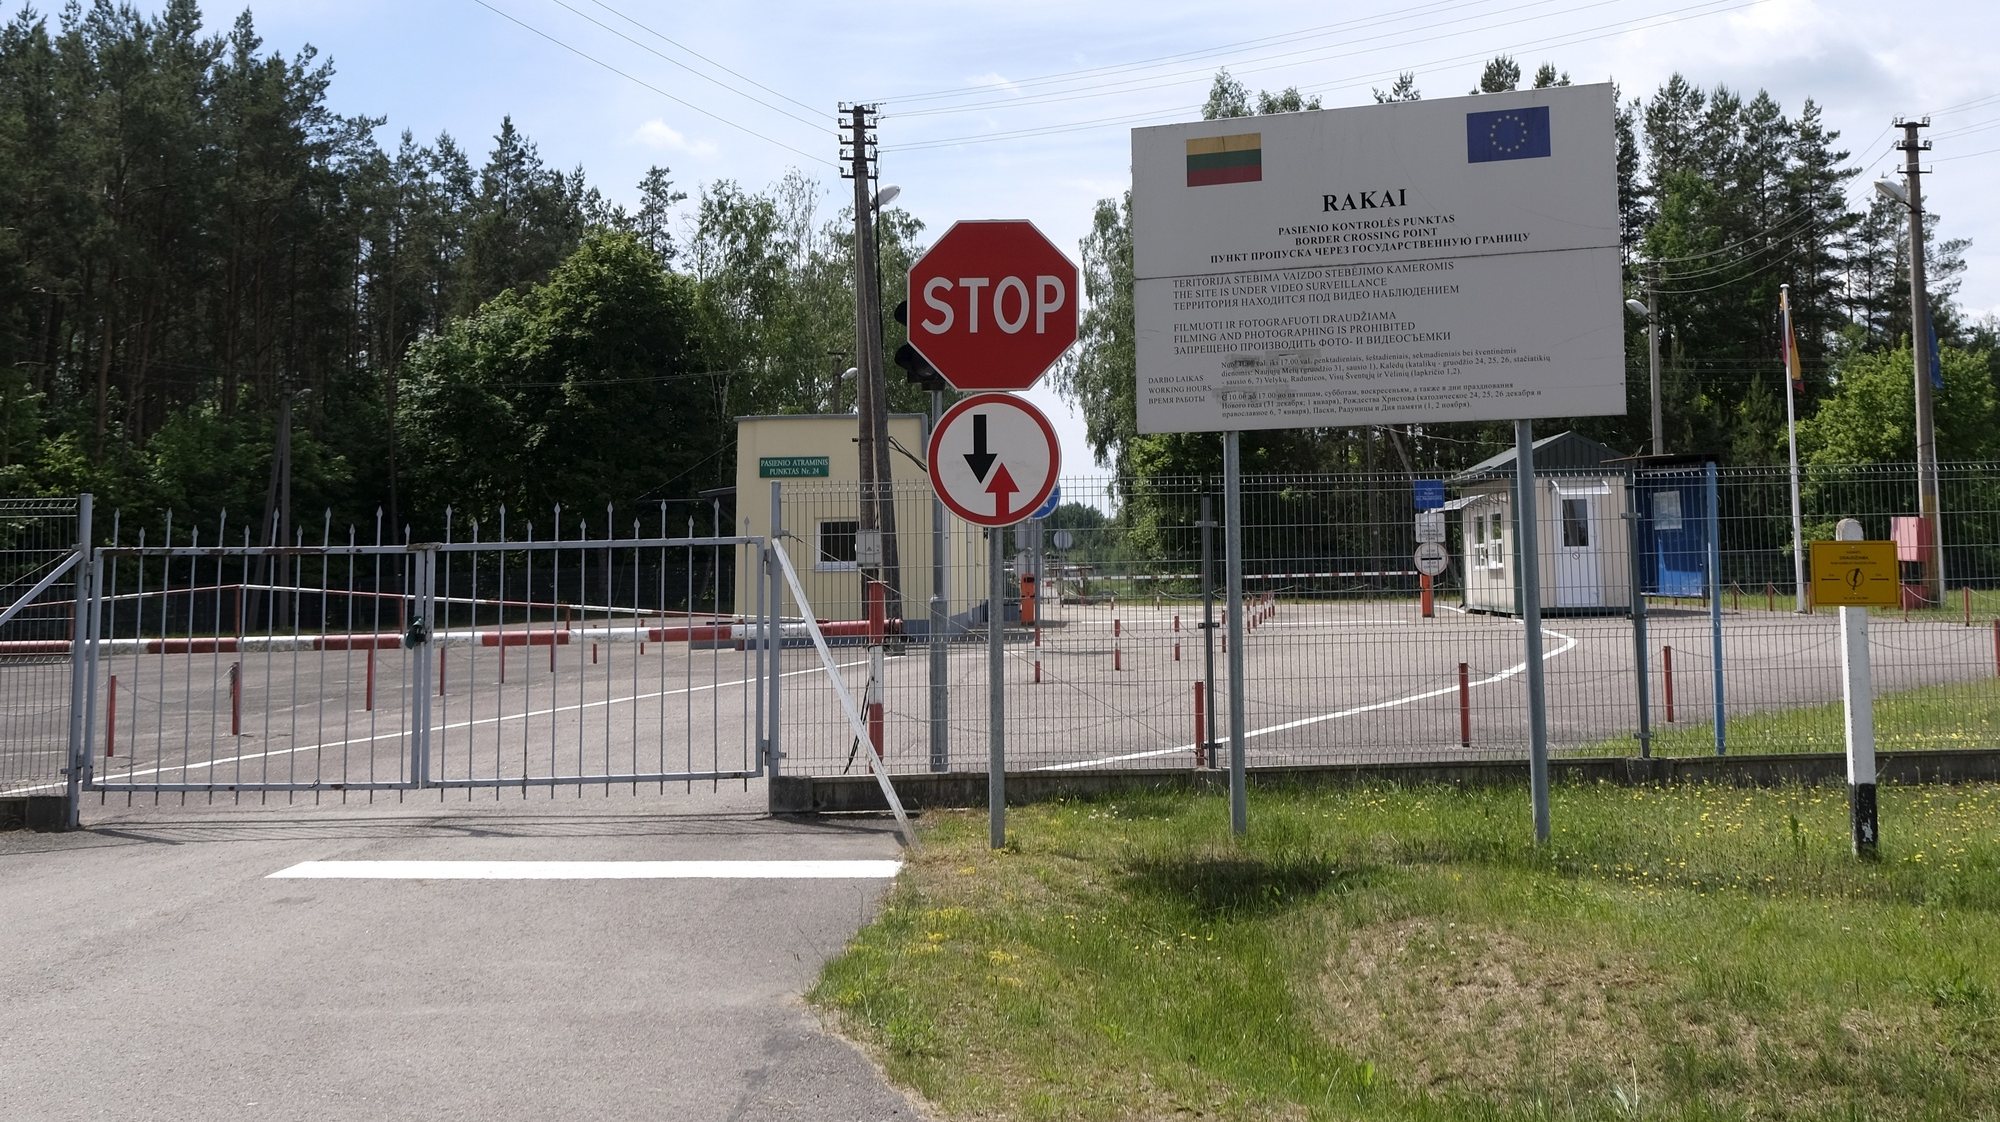 epa09274906 A border crossing point between Rakai, in Lithuania, and Petjulevci, in Belarus, is temporarily closed due to the measures to curb the spreading of the Covid-19 pandemic, in Rakai, Lithuania, 15 June 2016. According to official Lithuanian data, more than 380 illegal migrants from Belarus tried to enter Lithuania unril now in this year. The number is almost five times higher than in the entire year 2020.  EPA/VALDA KALNINA